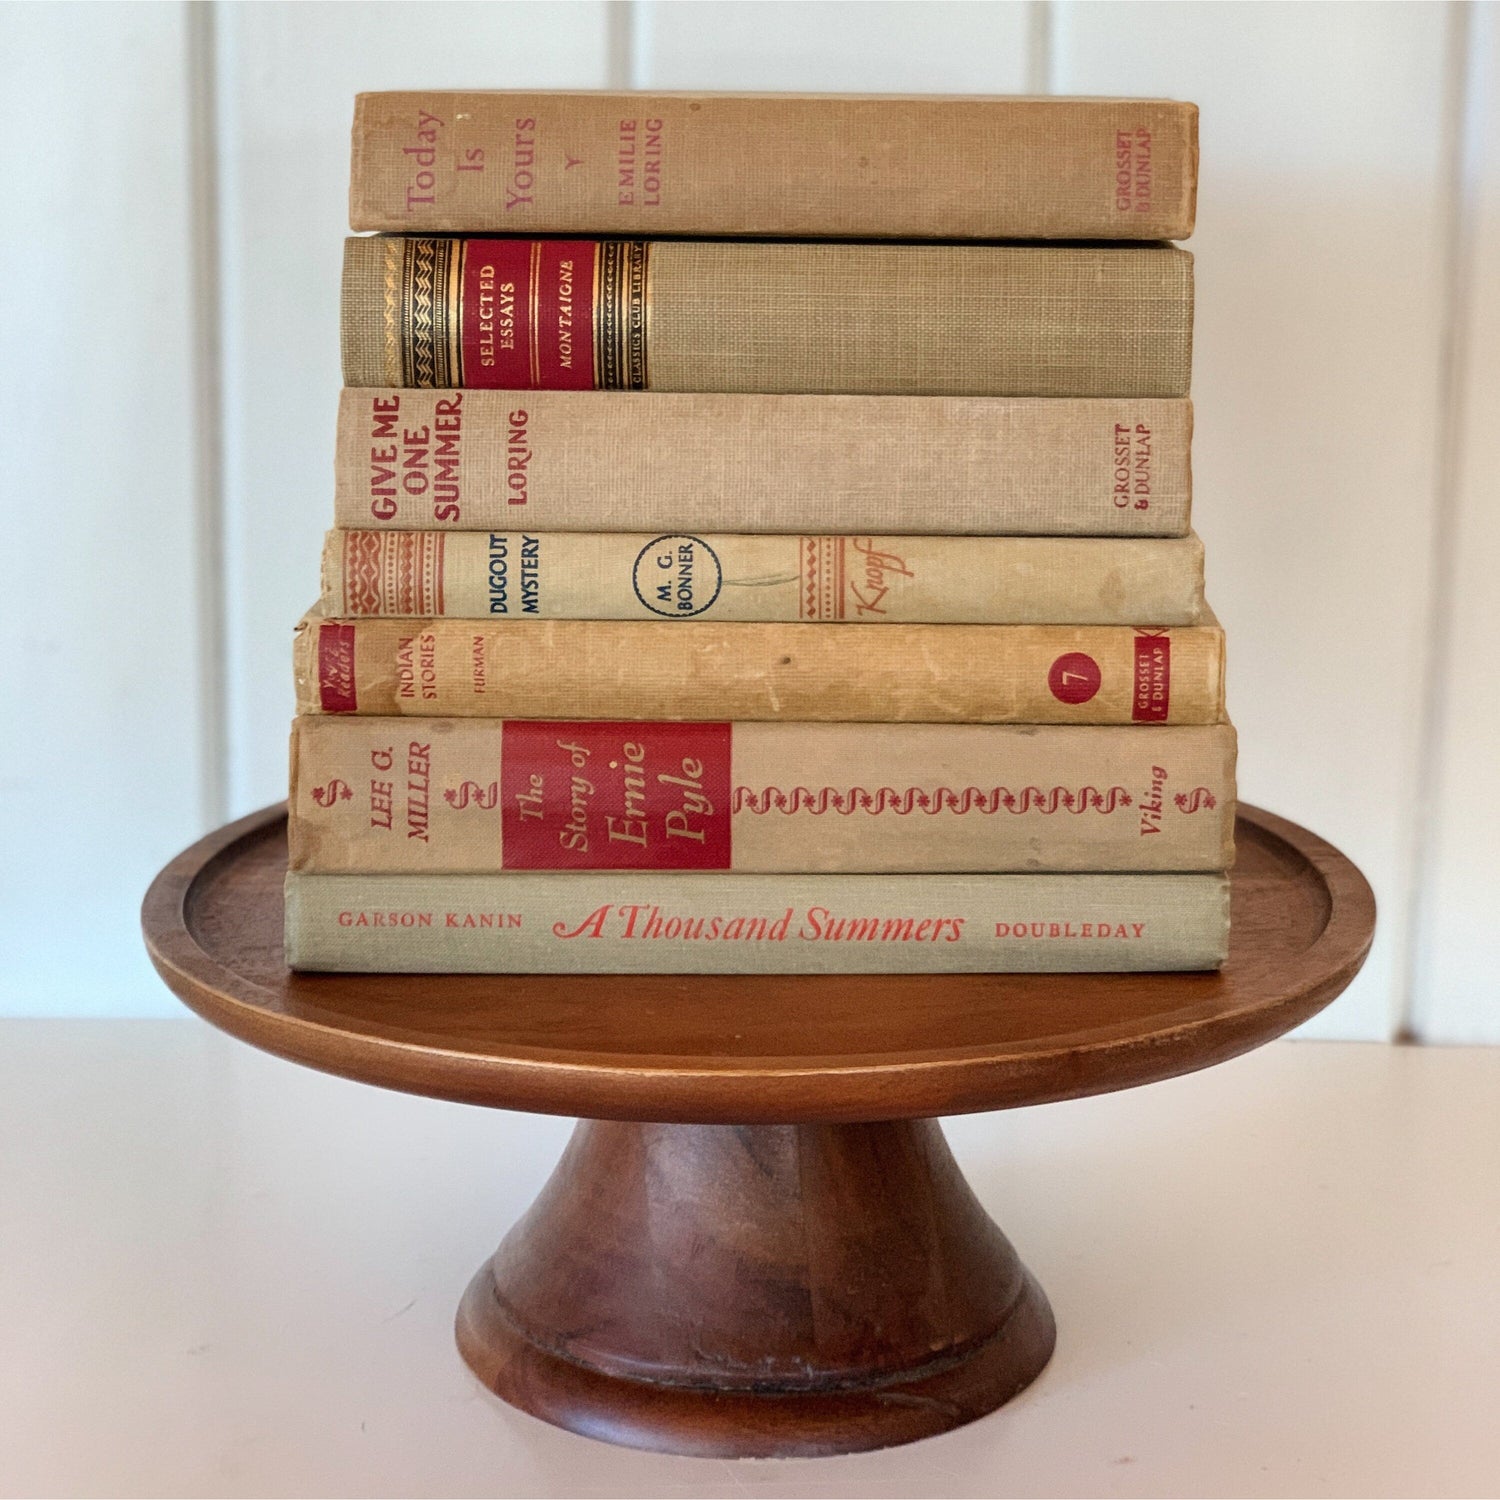 Beige and Red Book Collection, Vintage Decorative Books, Mid-Century Modern